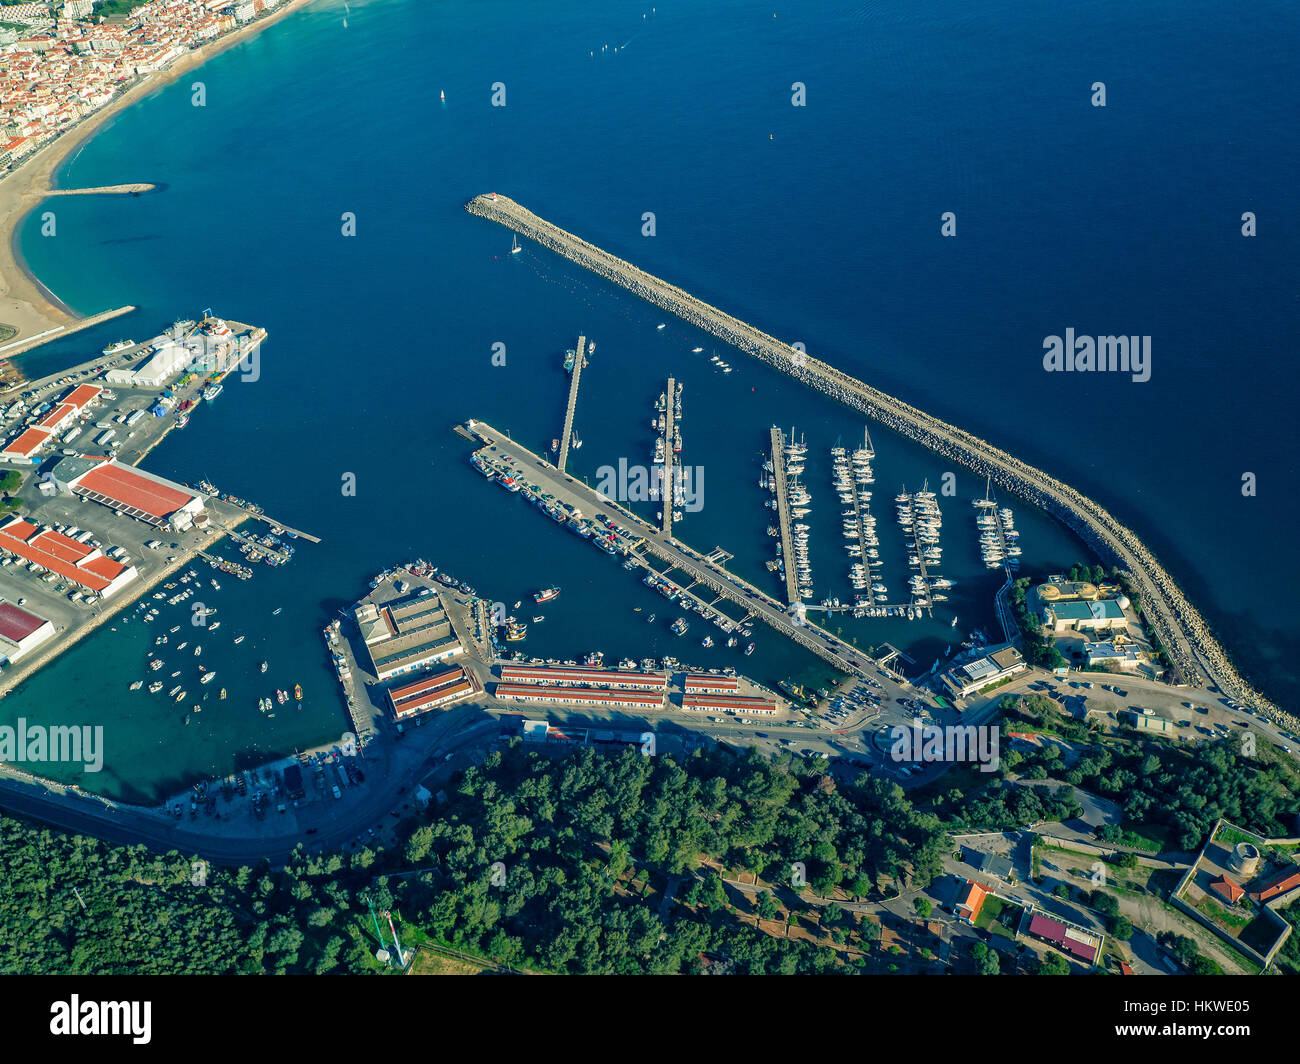 Aerial View of Sesimbra Town and Port, Portugal Stock Photo